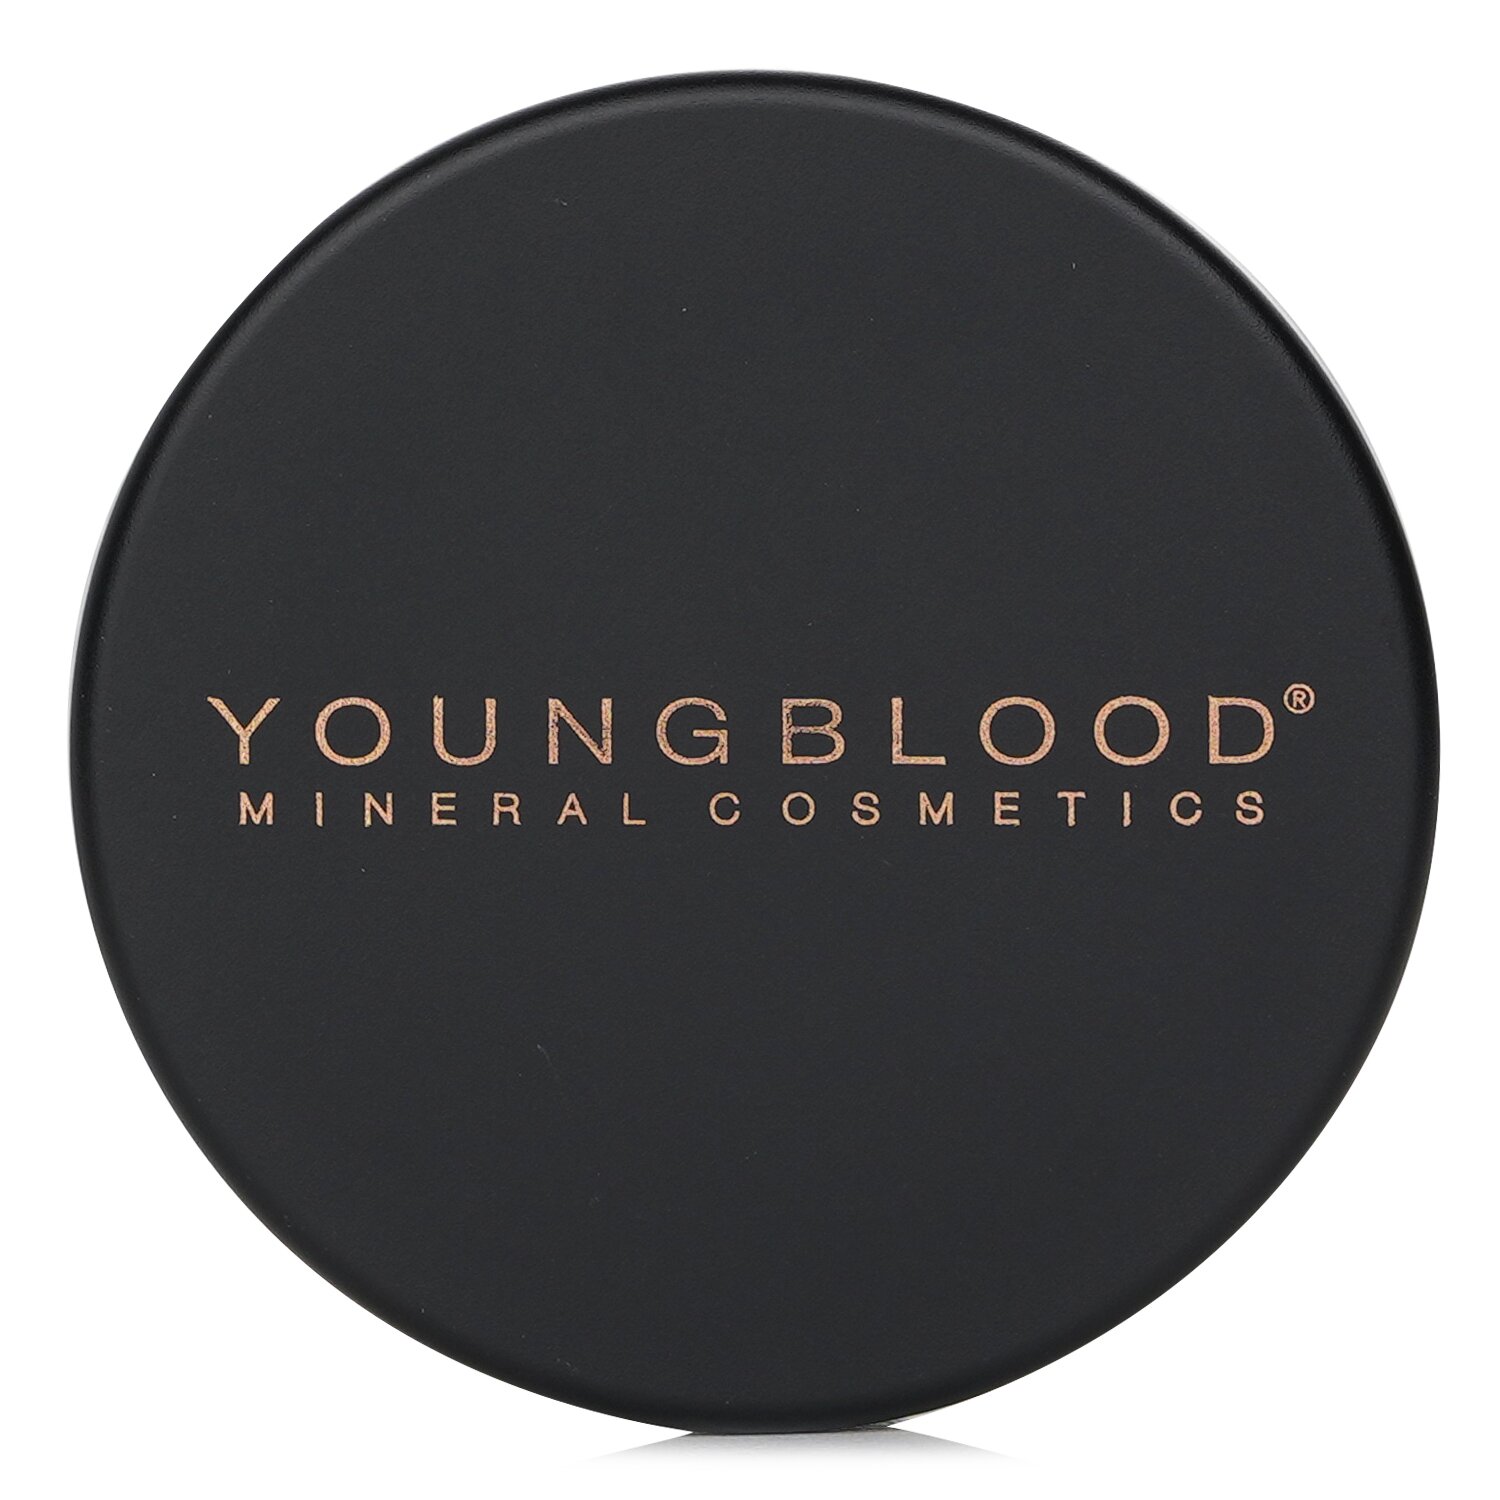 Youngblood Natural Loose Mineral Foundation 10g/0.35oz